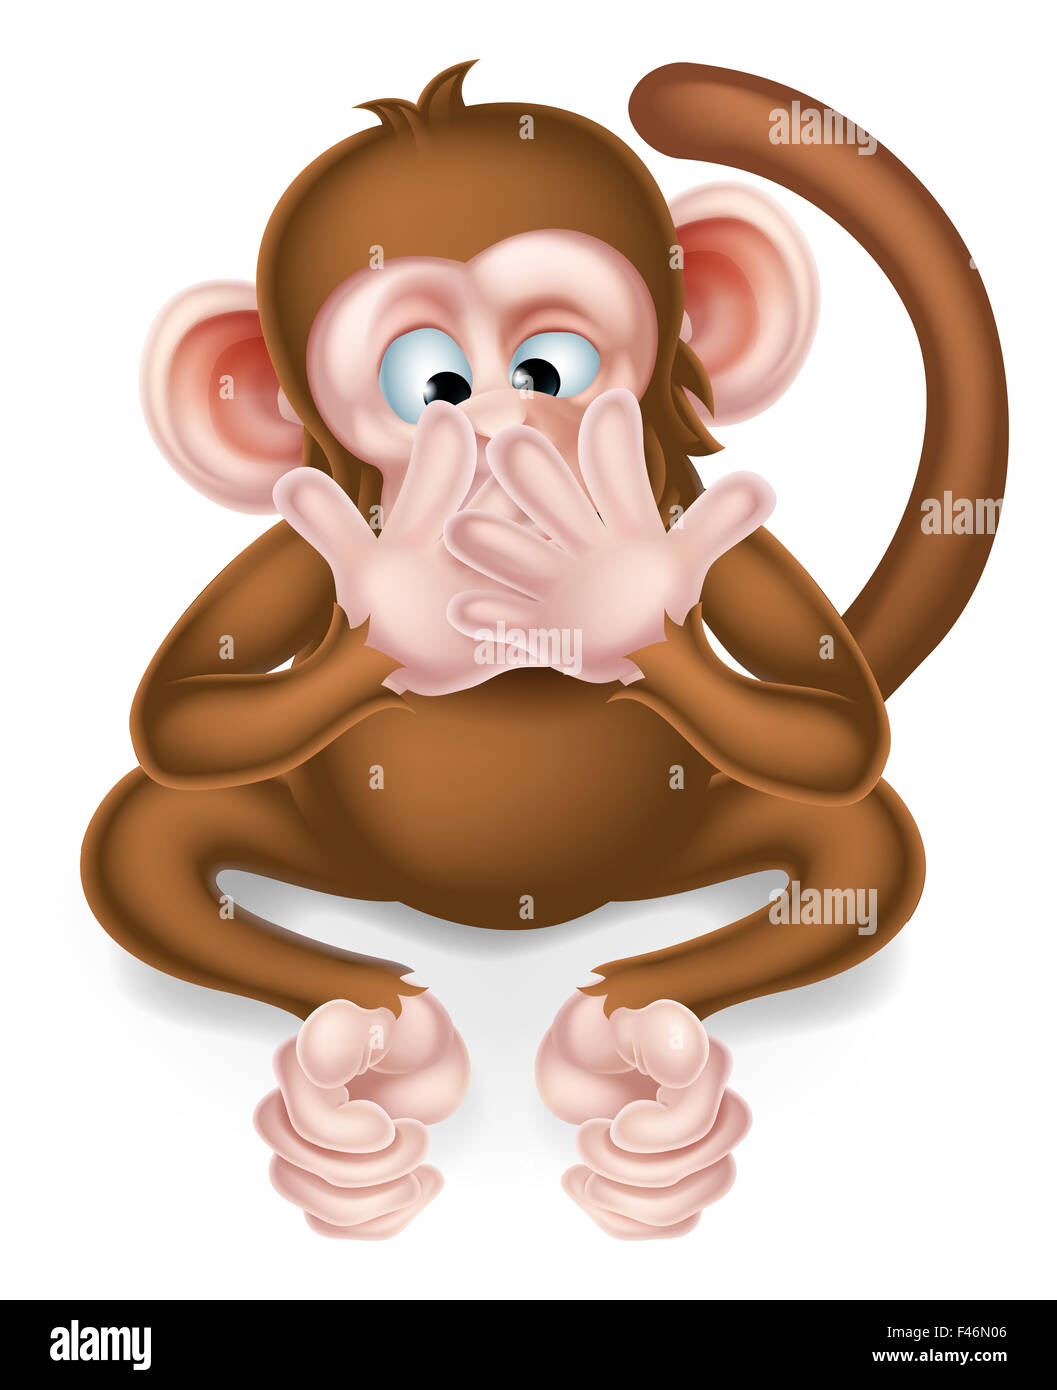 Speak no evil cartoon wise monkey covering his mouth Stock Photo